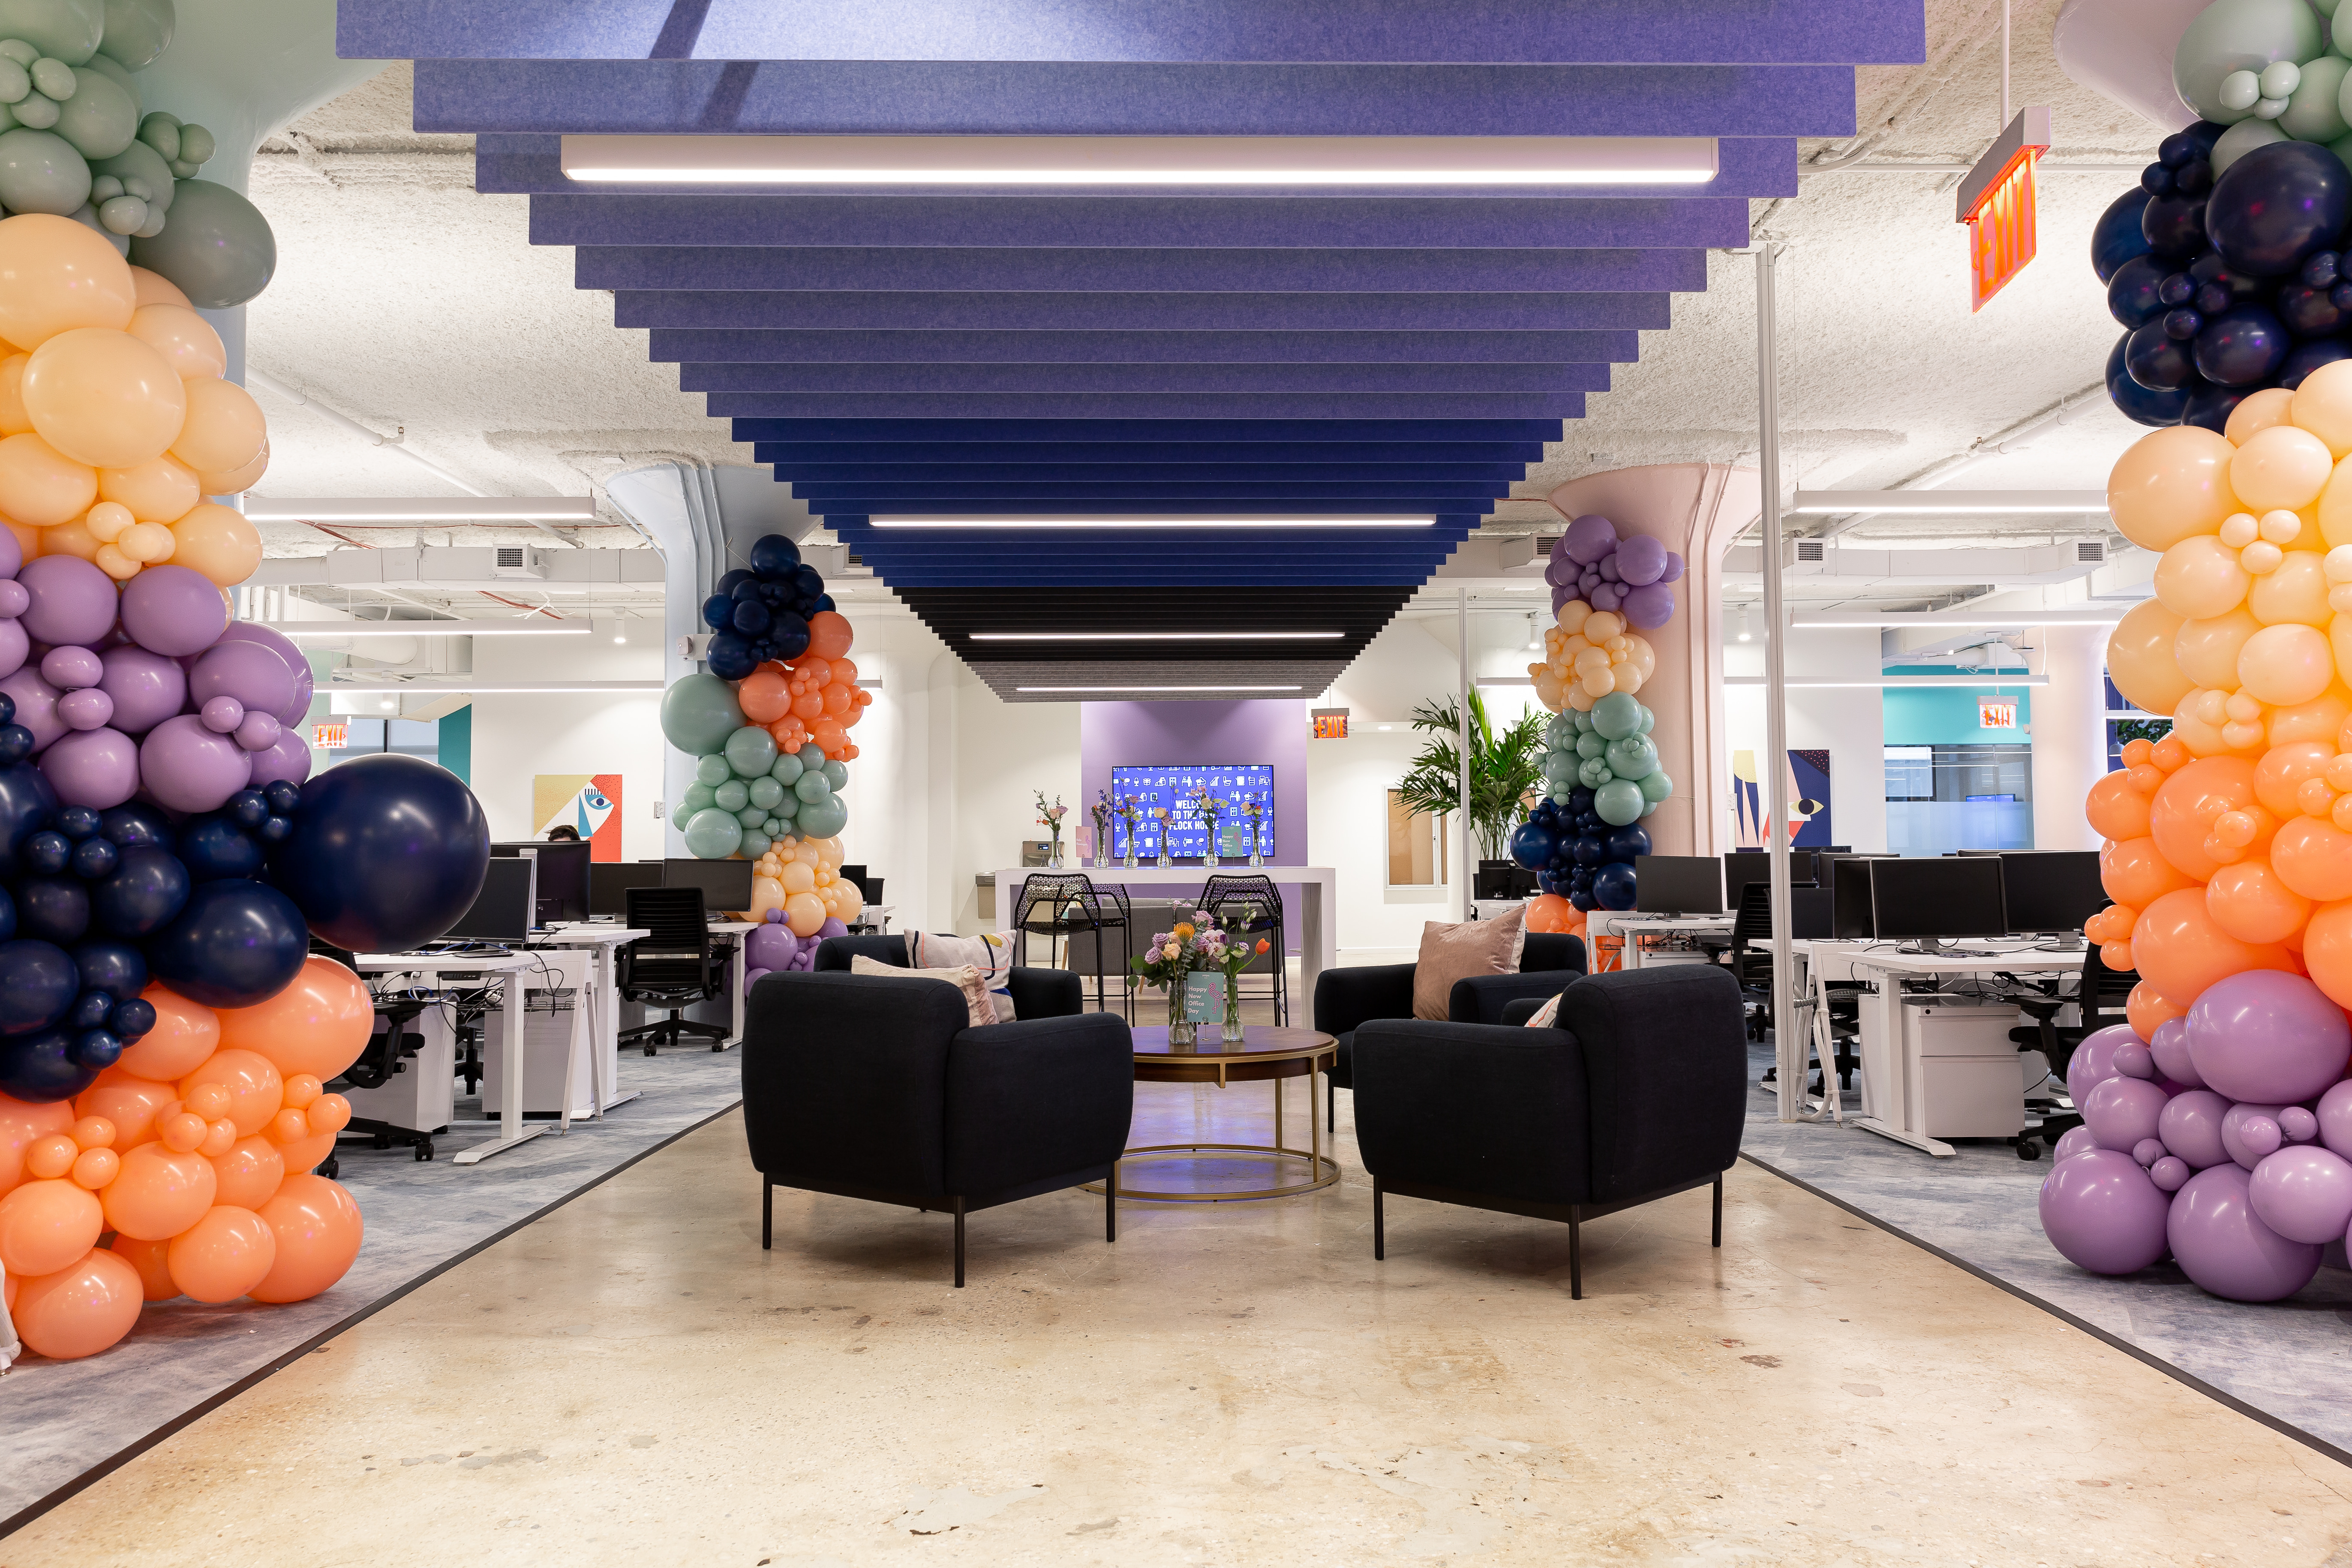 Photo of Yotpo’s NYC office with balloon columns and meeting nooks between bench-desk seating.Photo of Yotpo’s NYC office with balloon columns and meeting nooks between bench-desk seating.